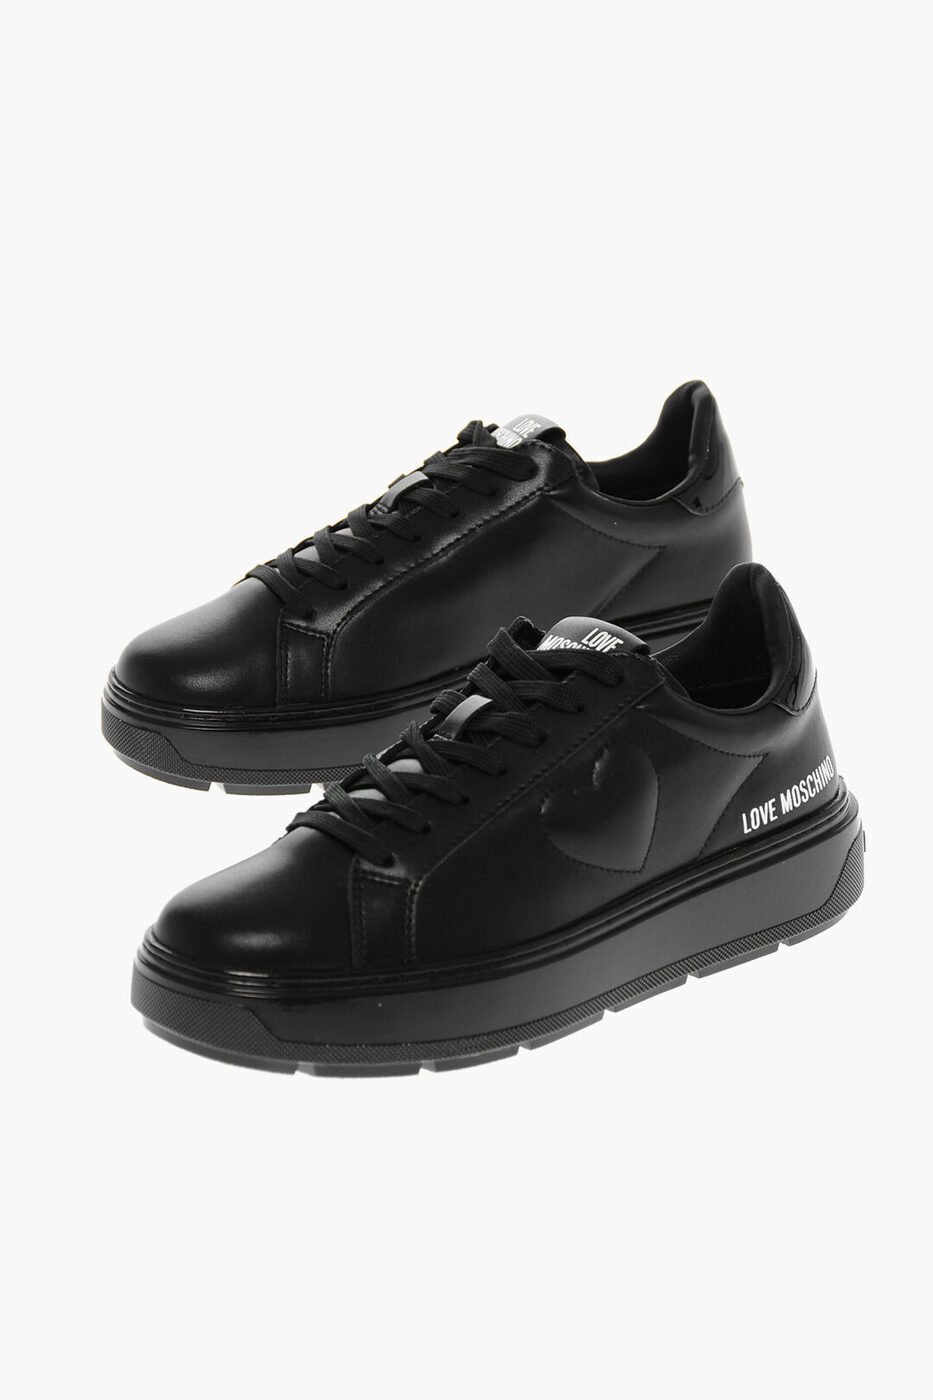 MOSCHINO モスキーノ スニーカー JA15674G0HIA500A レディース LOVE FAUX LEATHER BOLD40 LOW SNEAKERS..